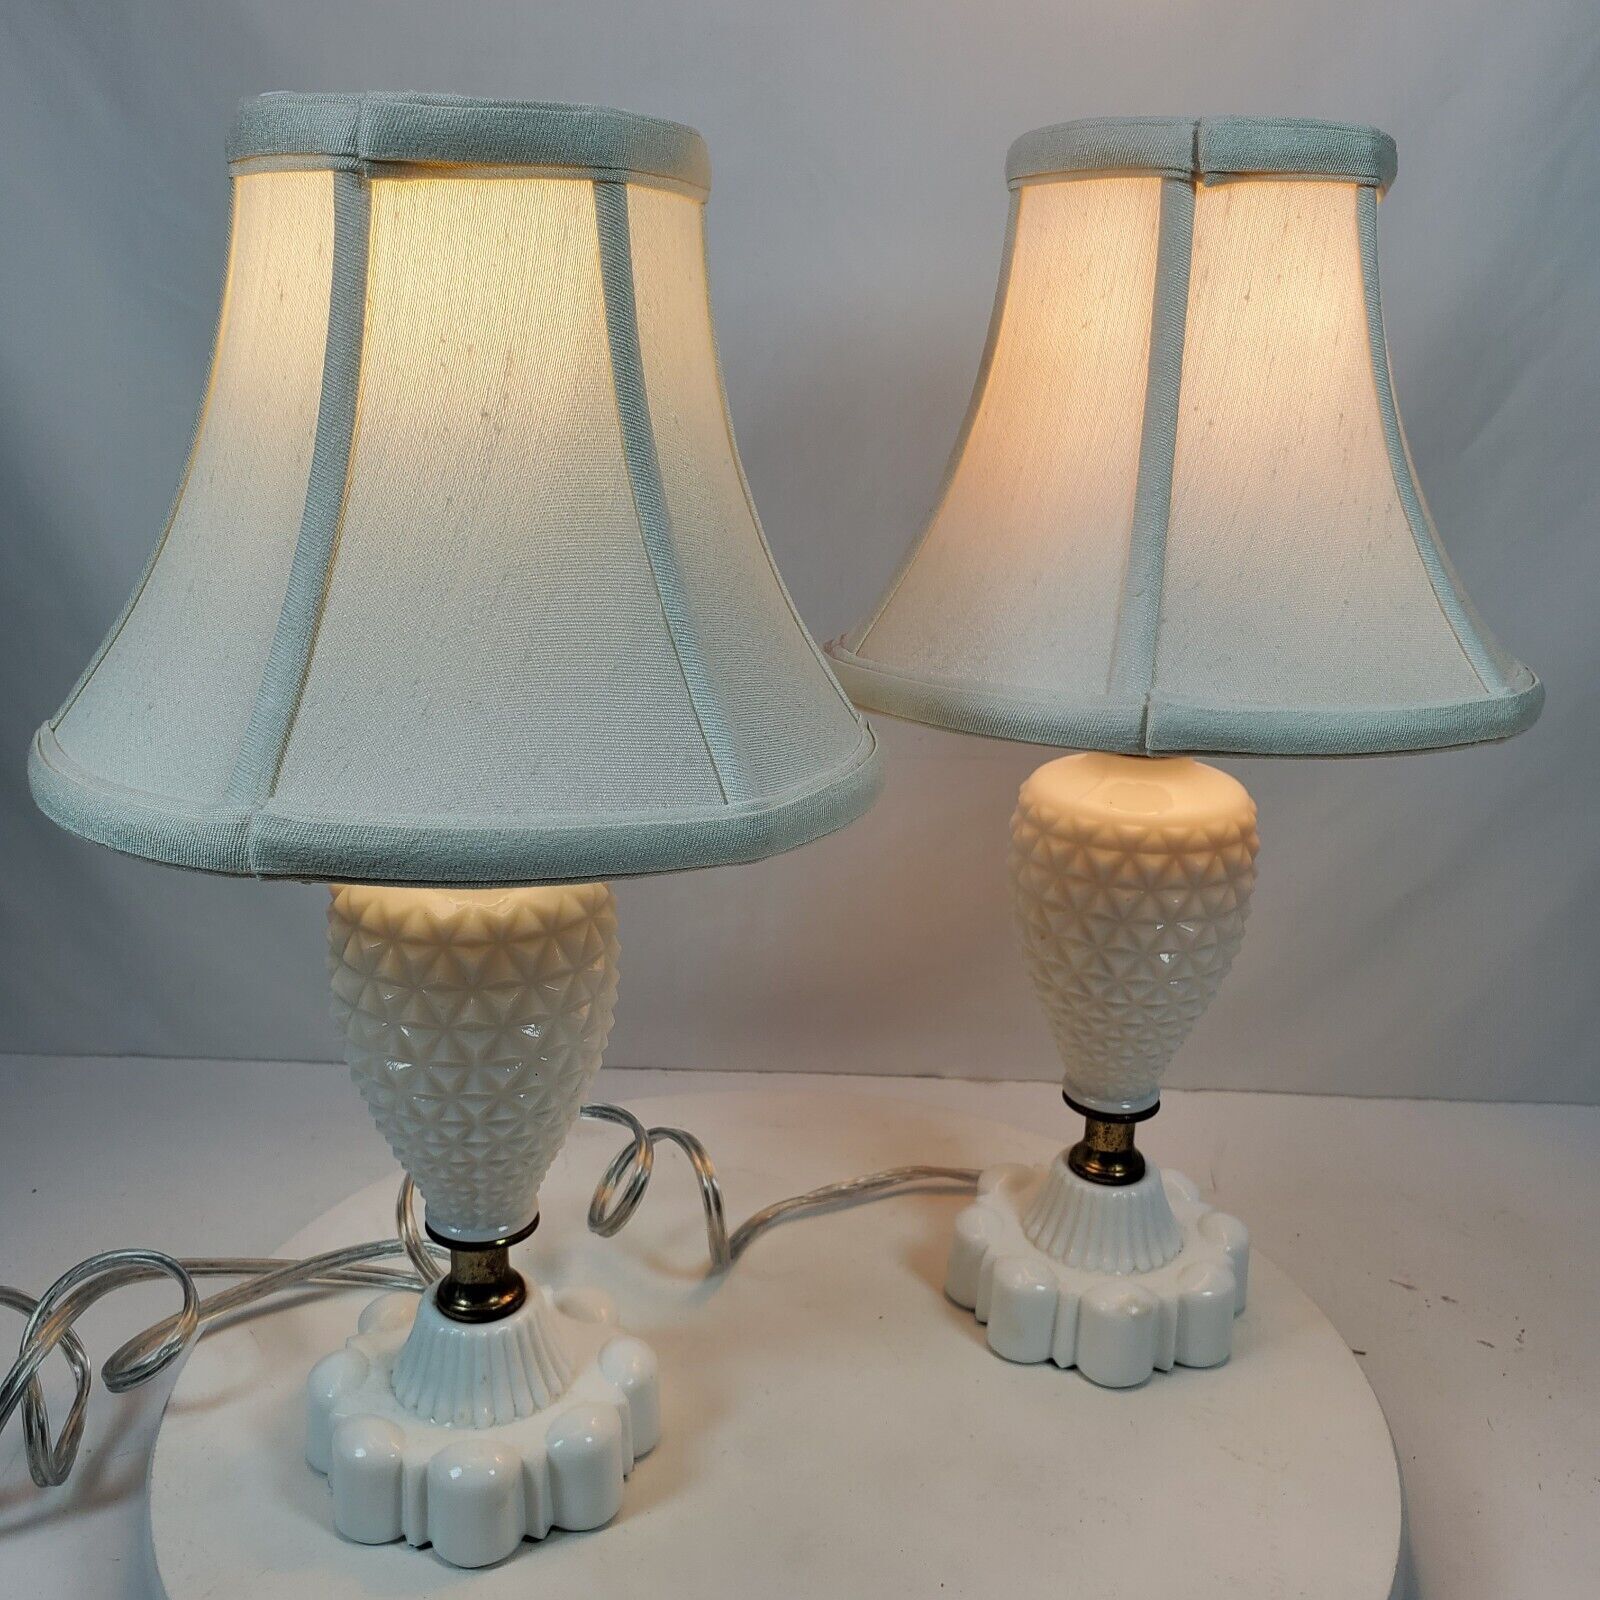 Vintage Mid Century Milk Glass Table Lamp SET of 2 w/ Bell Shades REWIRED